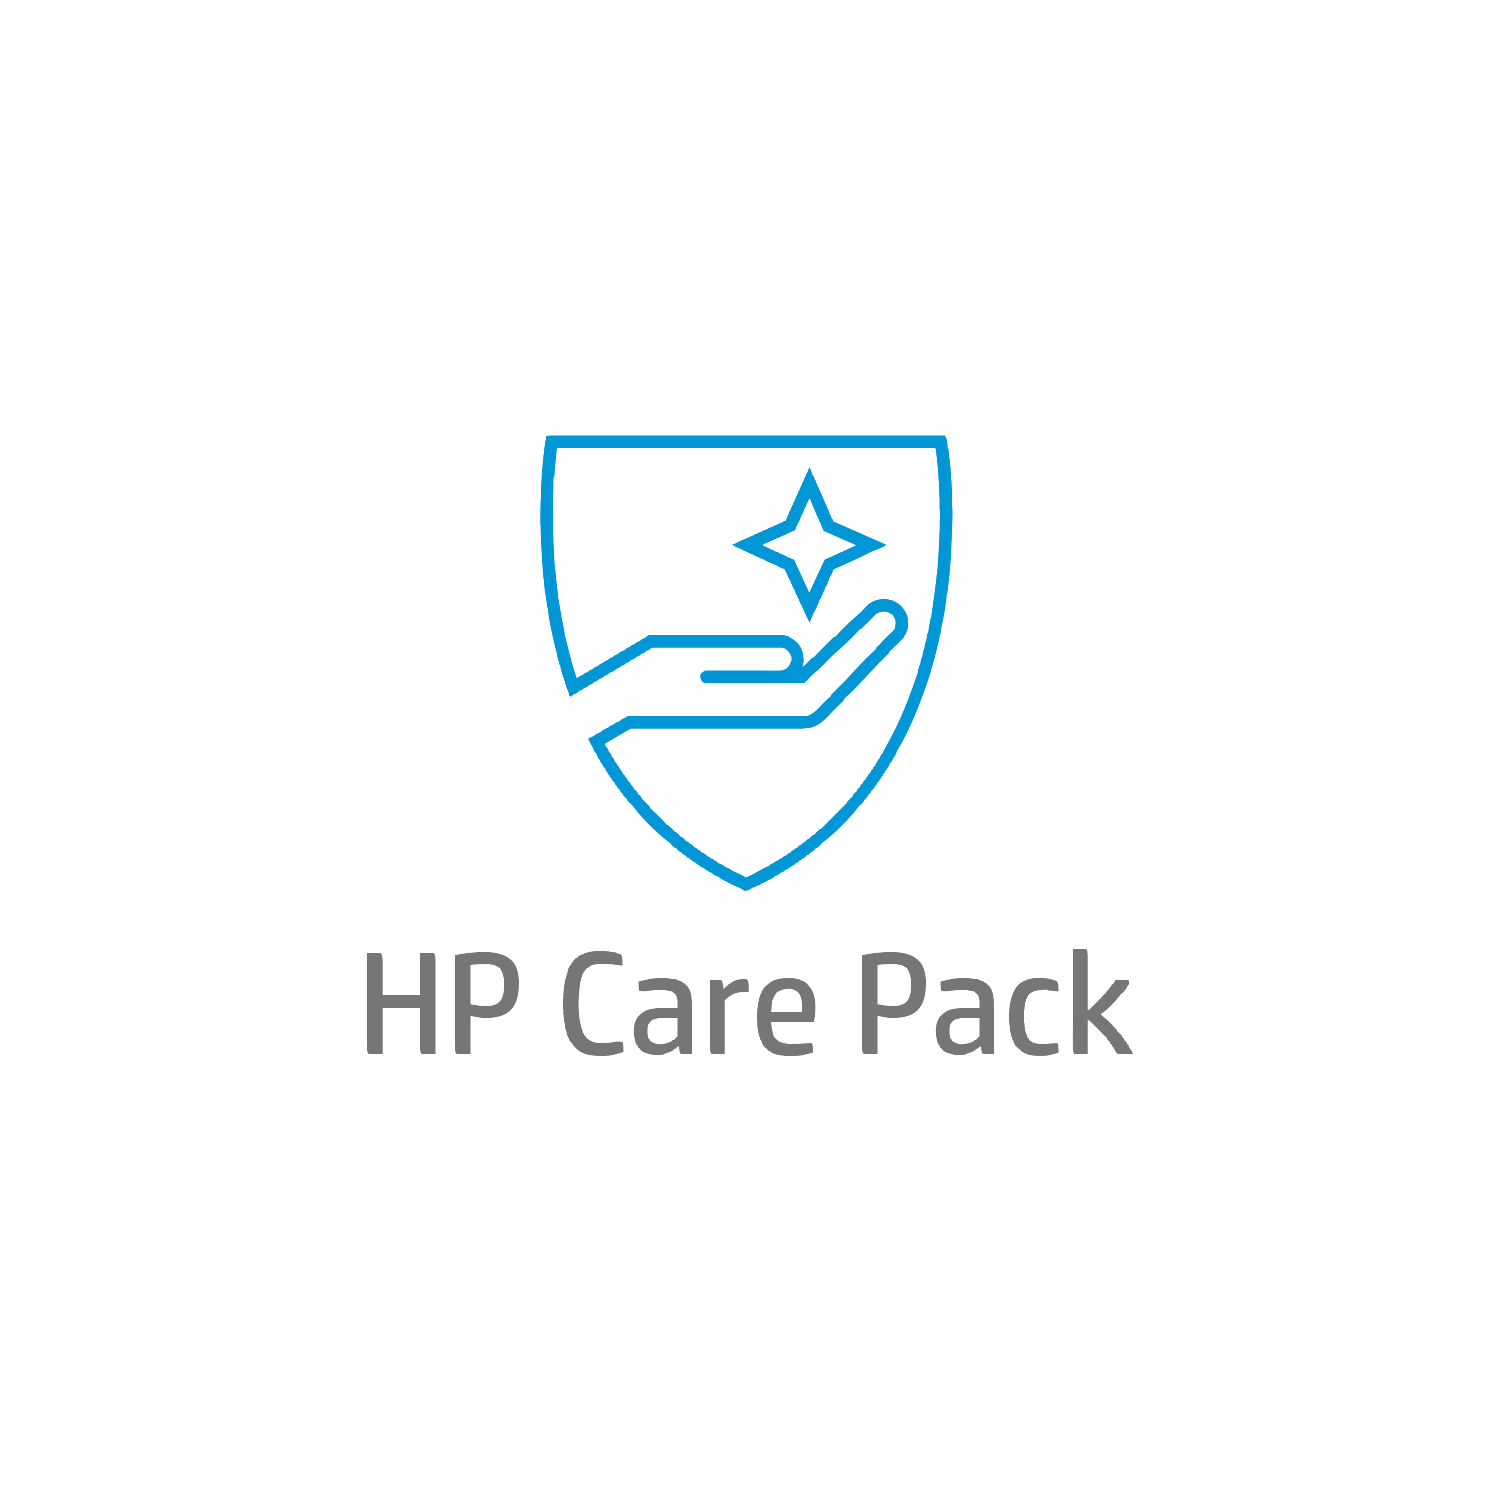 Bild von HP 1y PW Active Care Next Business Day Response Onsite w/1x DLE NB HW Supp, Active Care, Remote and Onsite, Post warranty, Standard workdays - 9 hours, 1 year, Next business day response